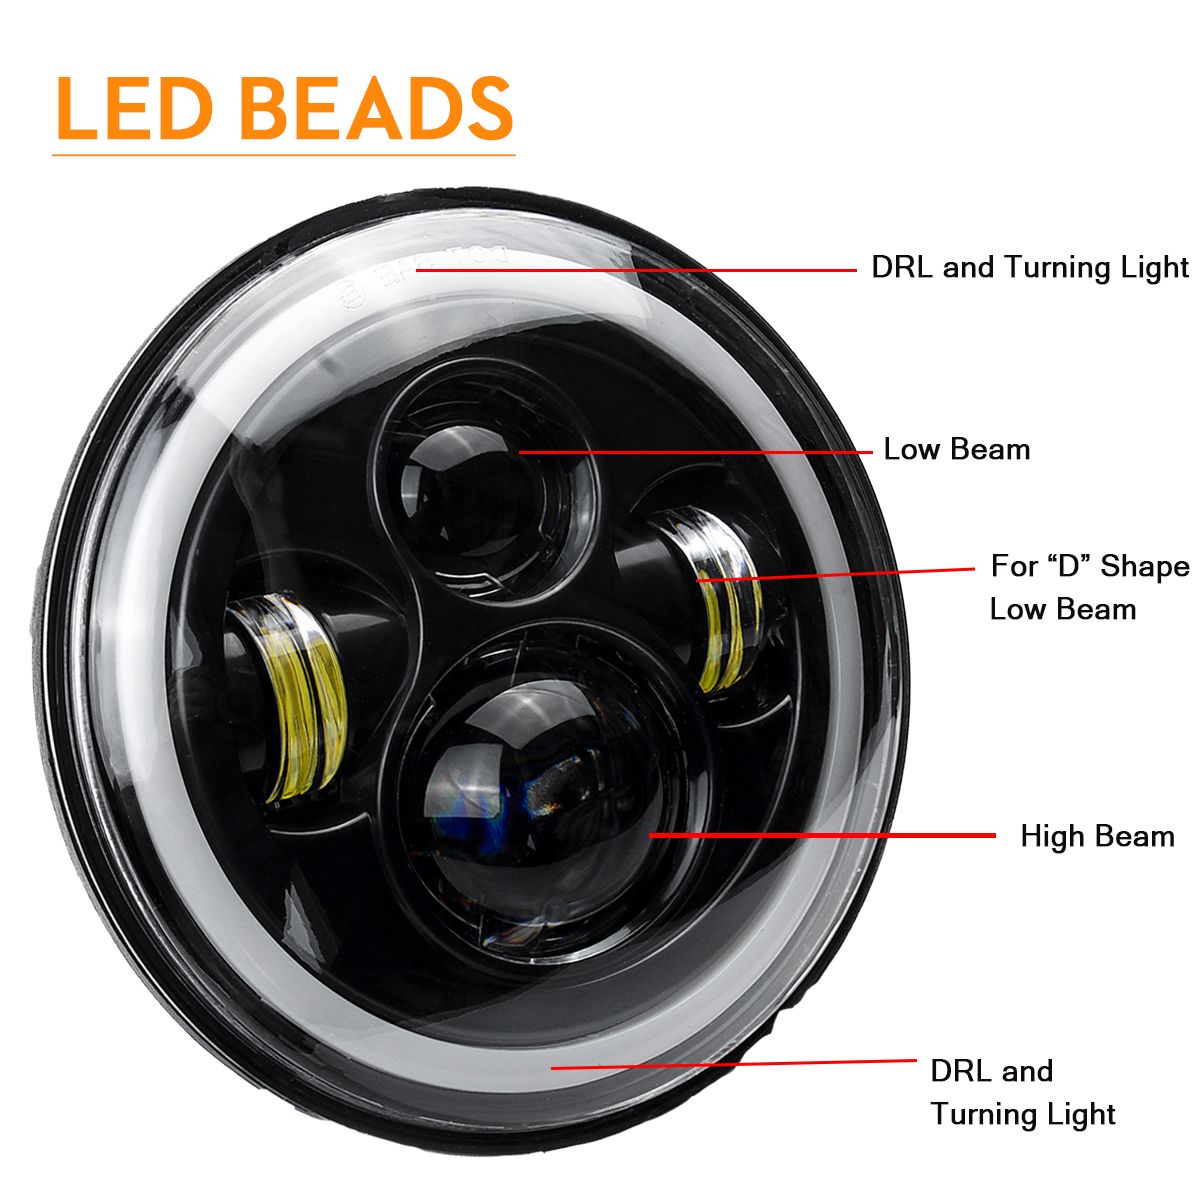 2Pcs-7-Inch-Car-Round-LED-Headlights-Head-Turn-Signal-Lamps-DRL-HighLow-Beam-Waterproof-IP67-For-Jee-1593684